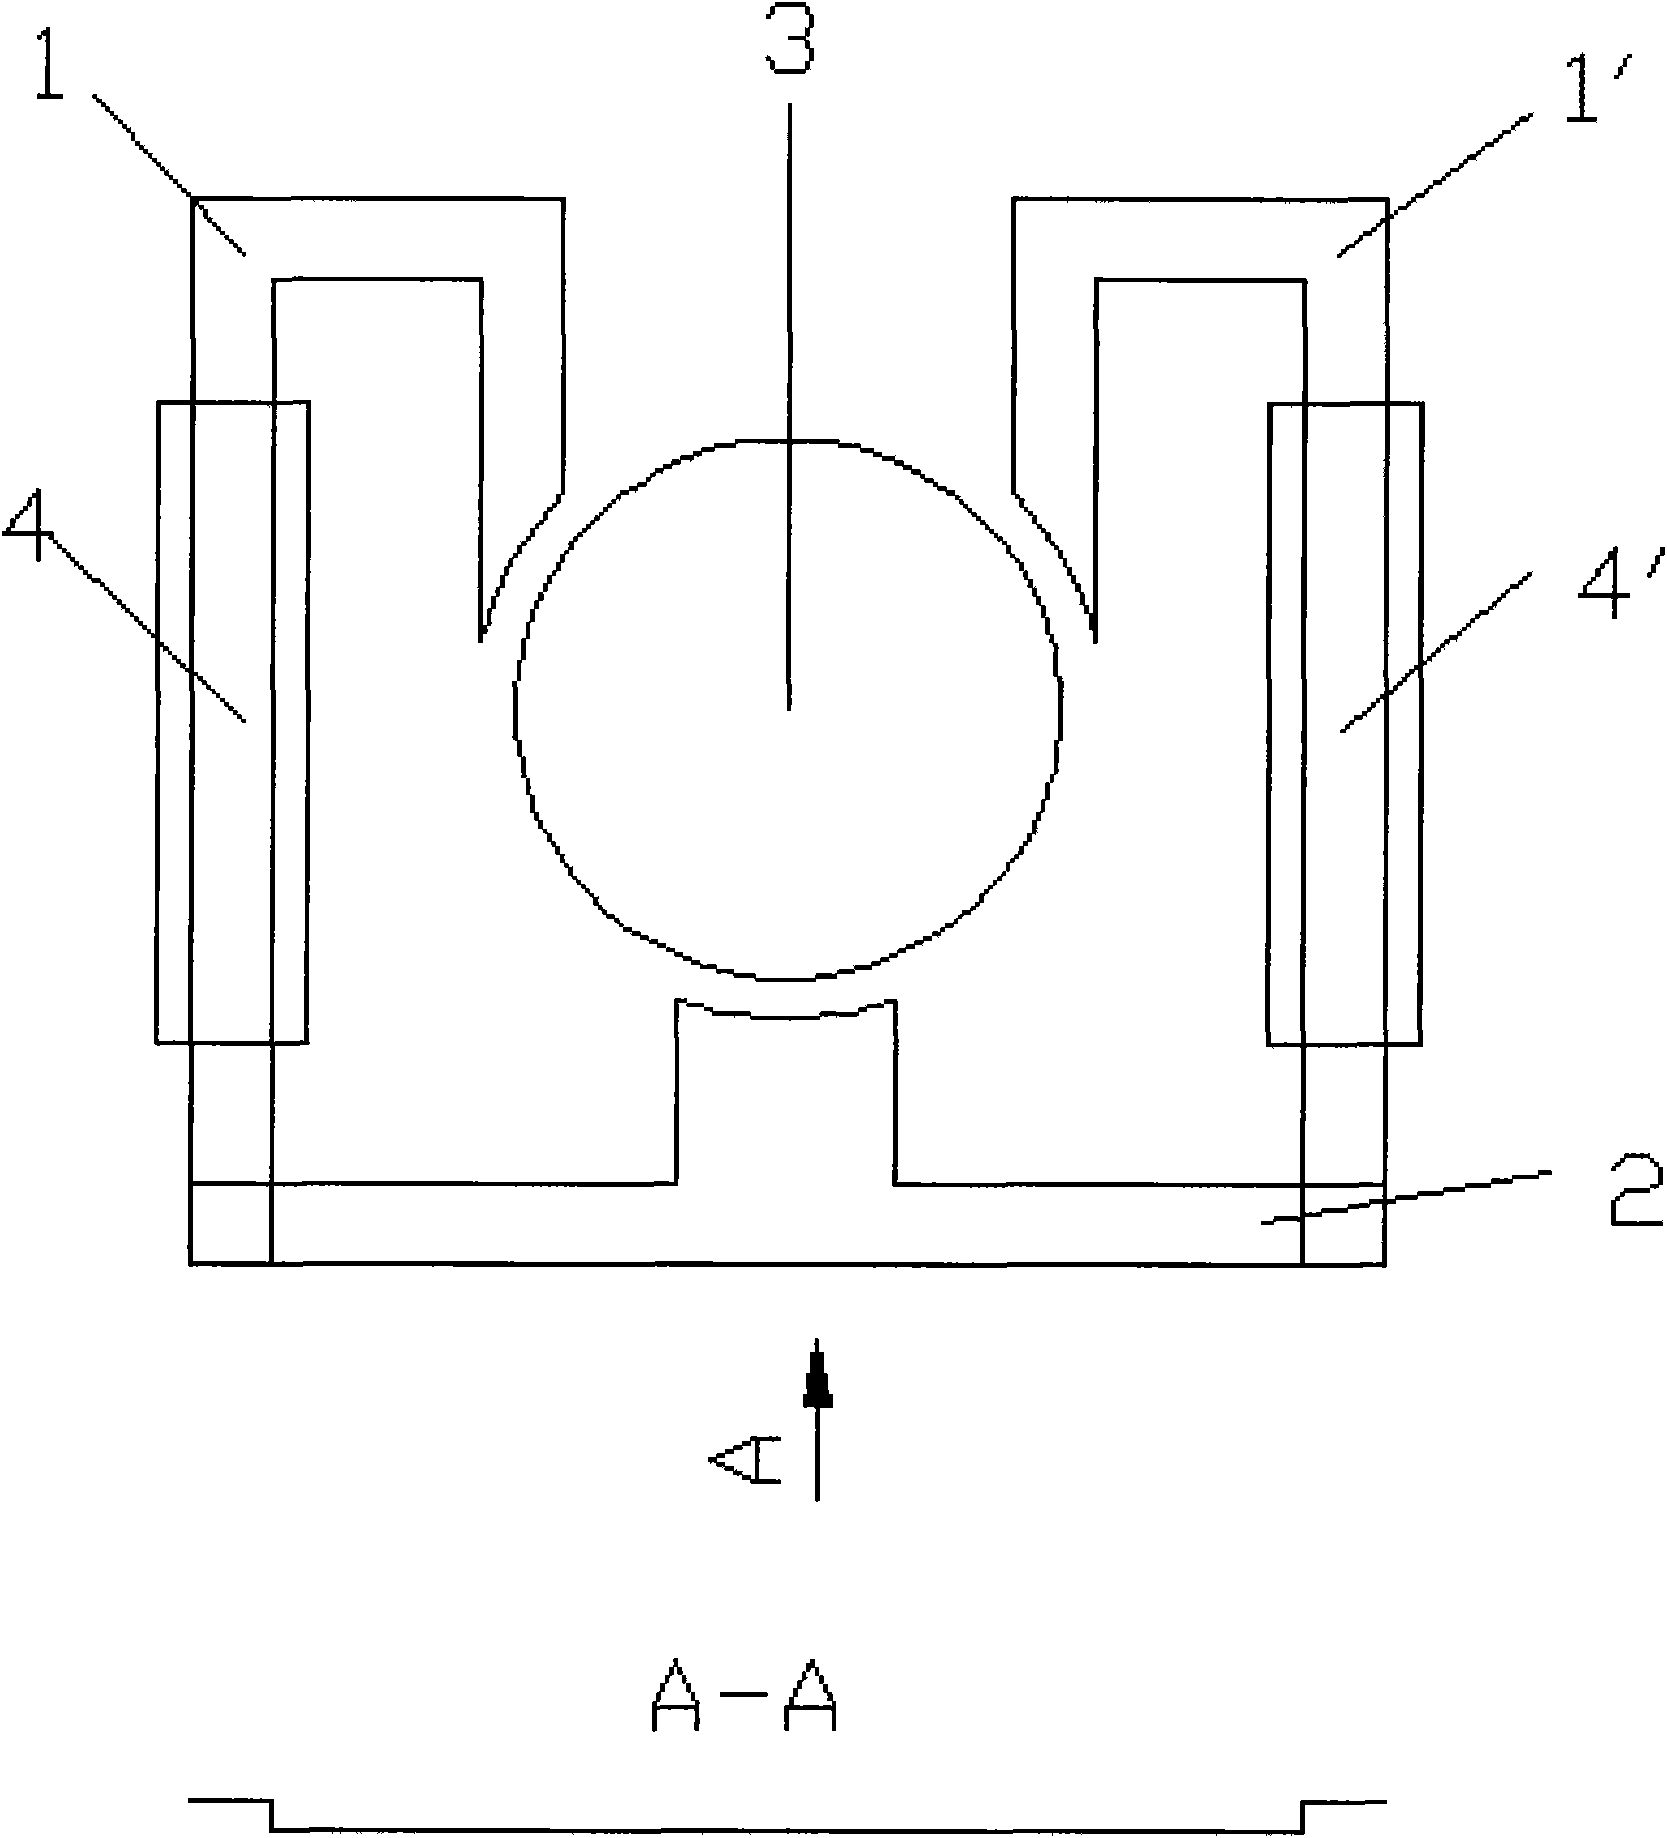 Instrument step motor with large rotor and low speed ratio